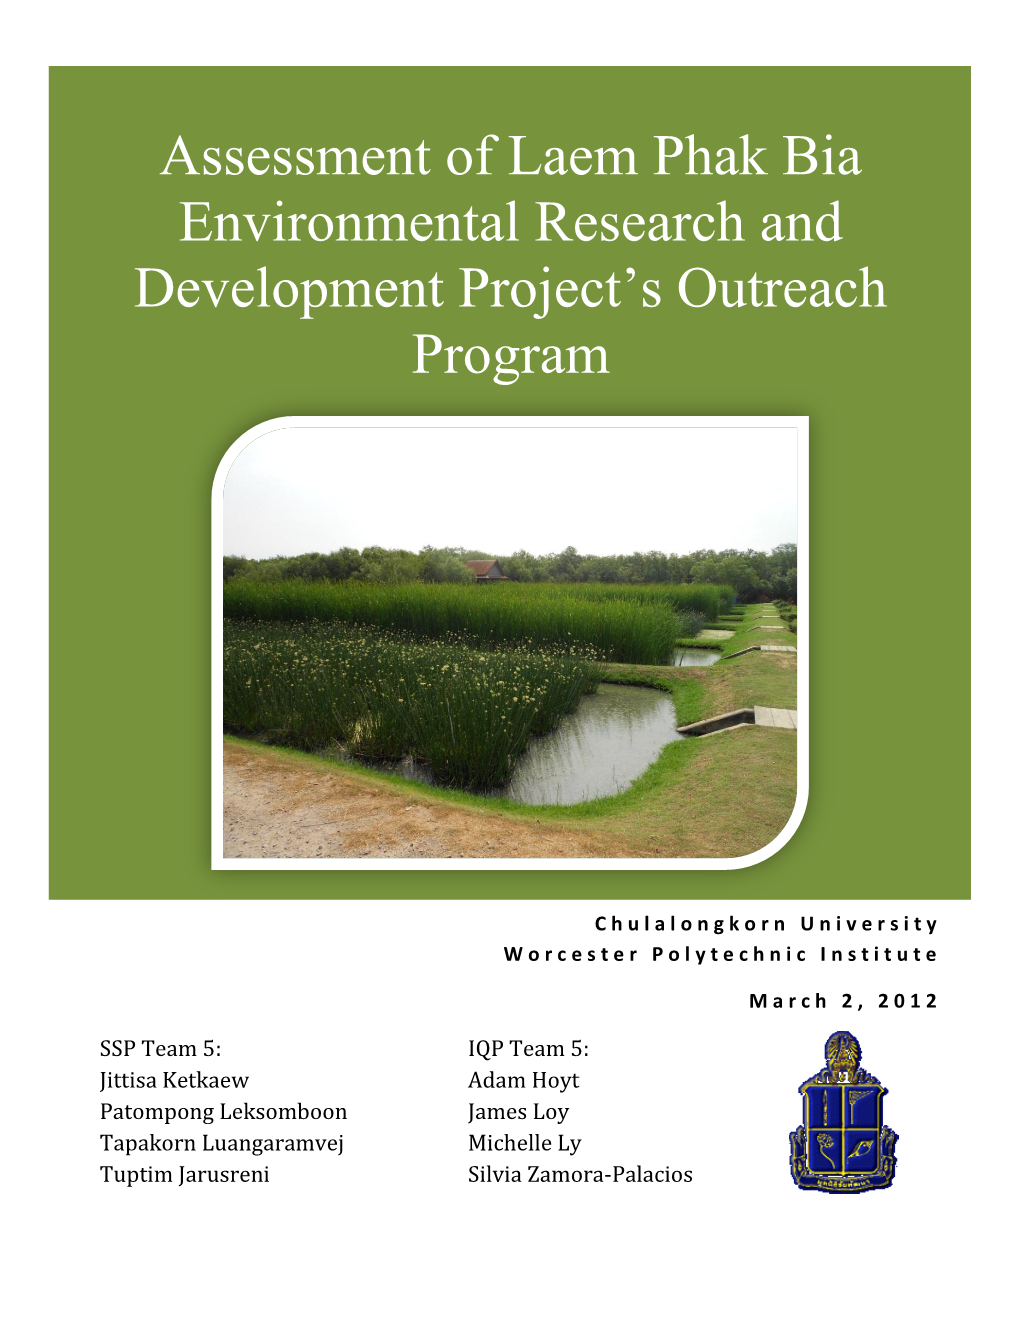 Assessment of Laem Phak Bia Environmental Research and Development Project's Outreach Program